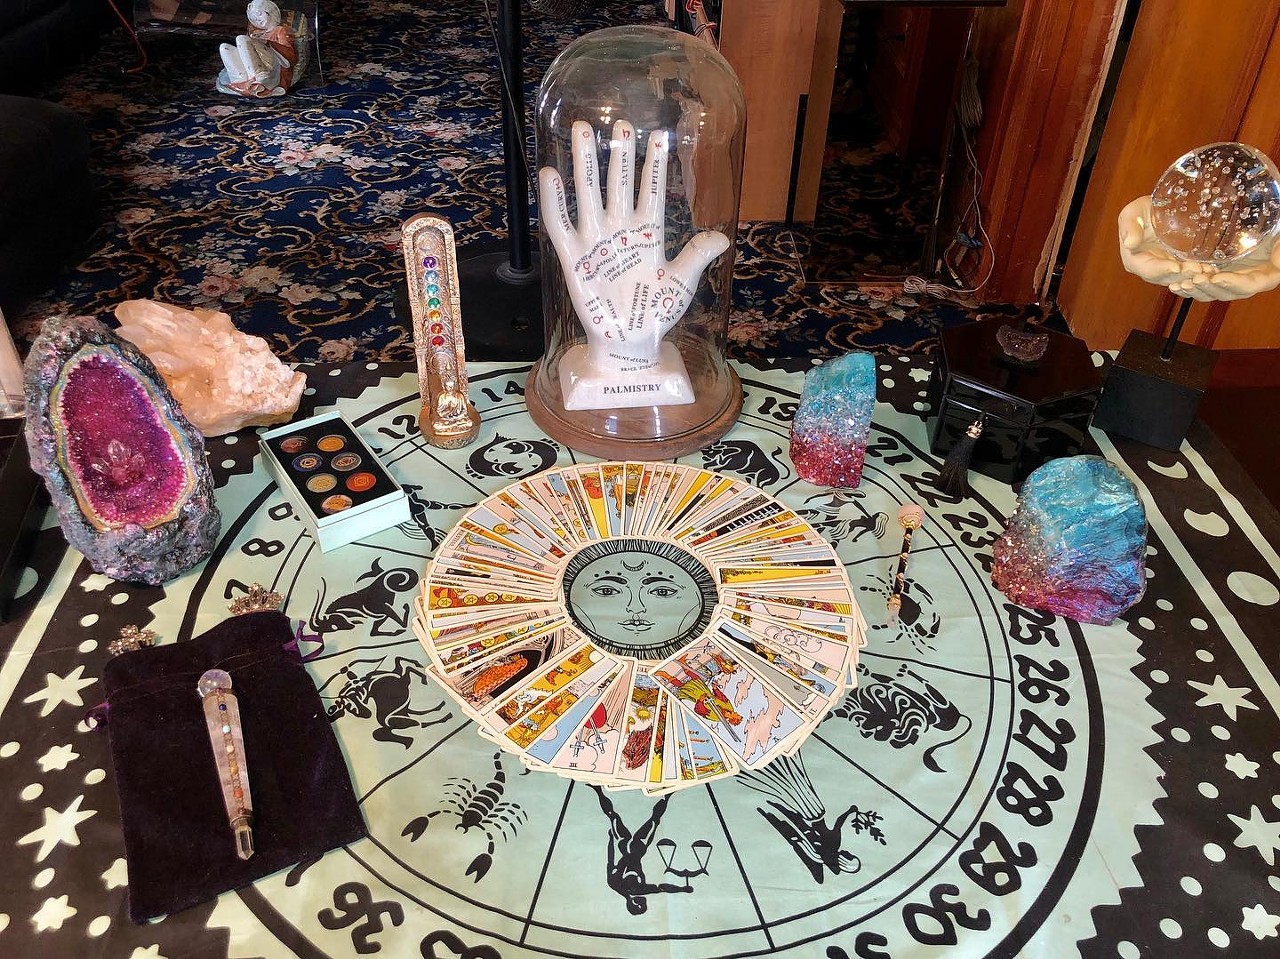 
Witches Night Bazaar: Rite of Spring
When: April 12 from 7 p.m.-12 a.m.
Where: Tangent Gallery (Detroit)
What: An evening of art, music, education, and magic 
Who: Tarot readers, metaphysical workers, and local vendors
Why: Kick off spring with a selection of jewelry, fine art, herbalism, self-care, and more. There will also be classes on crafting your own ritual tools and herbal potions.